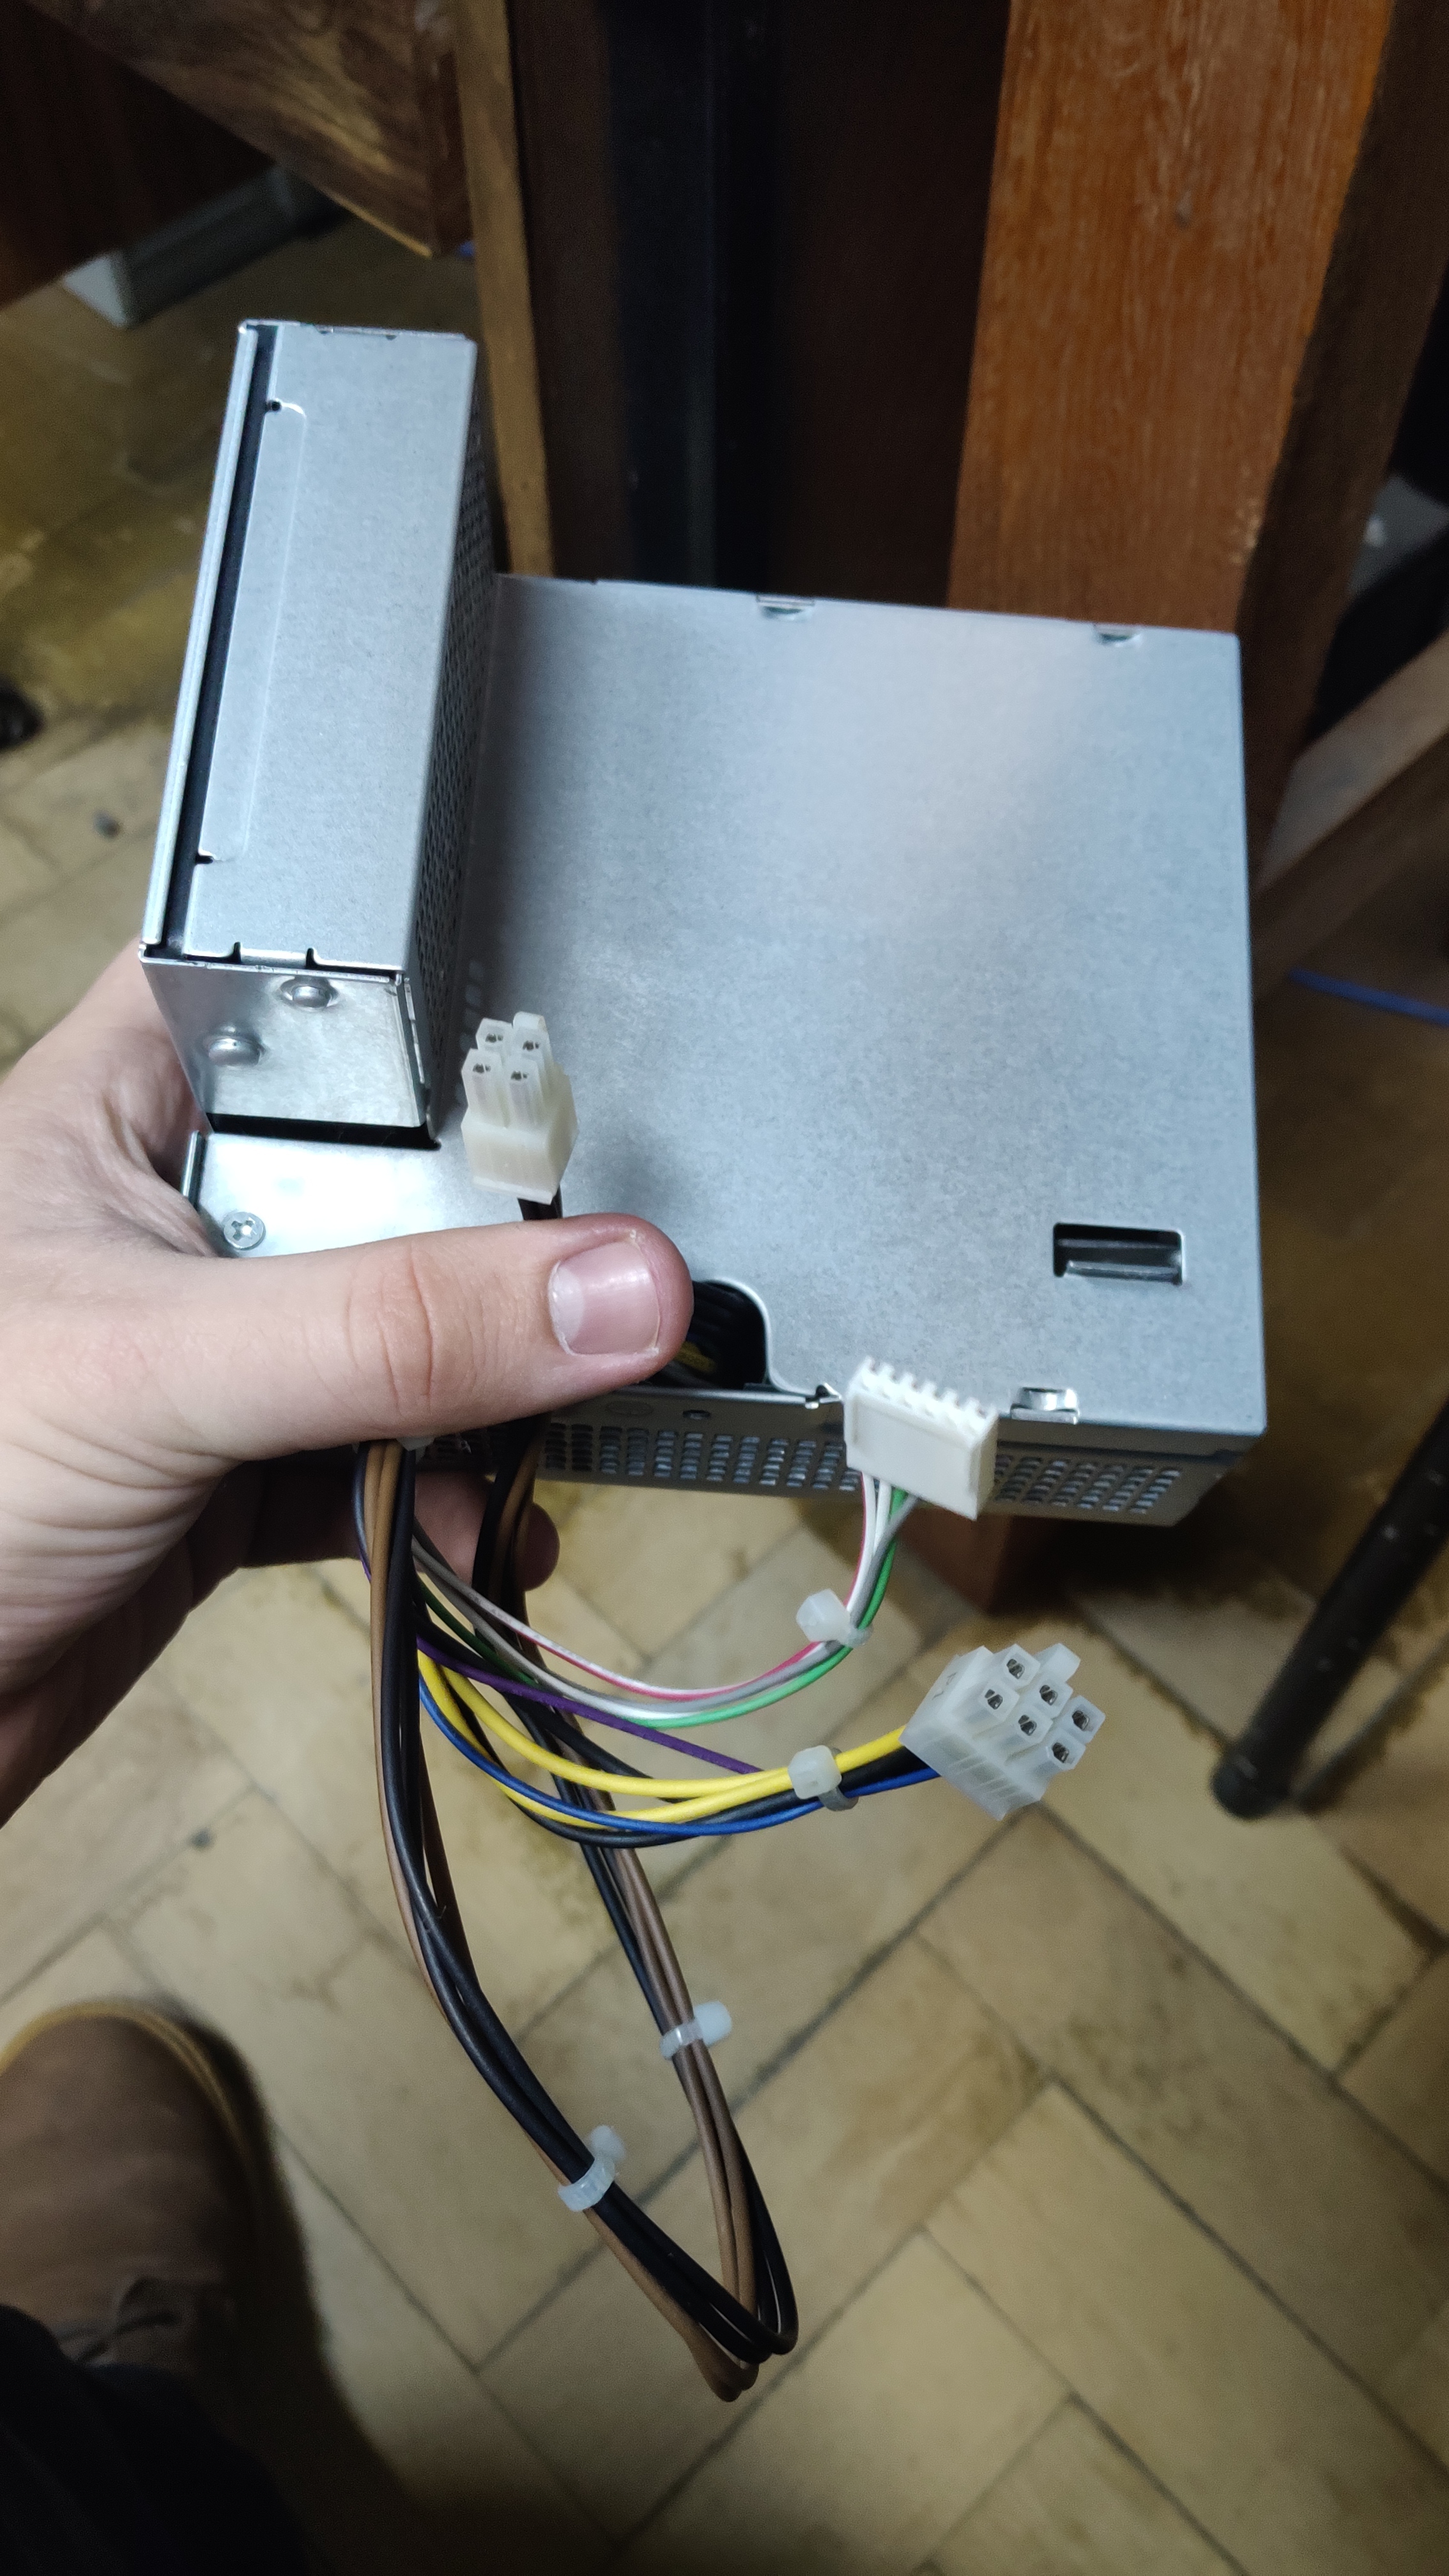 How Do I Test This Hp Compaq Power Supply Psu Level1techs Forums